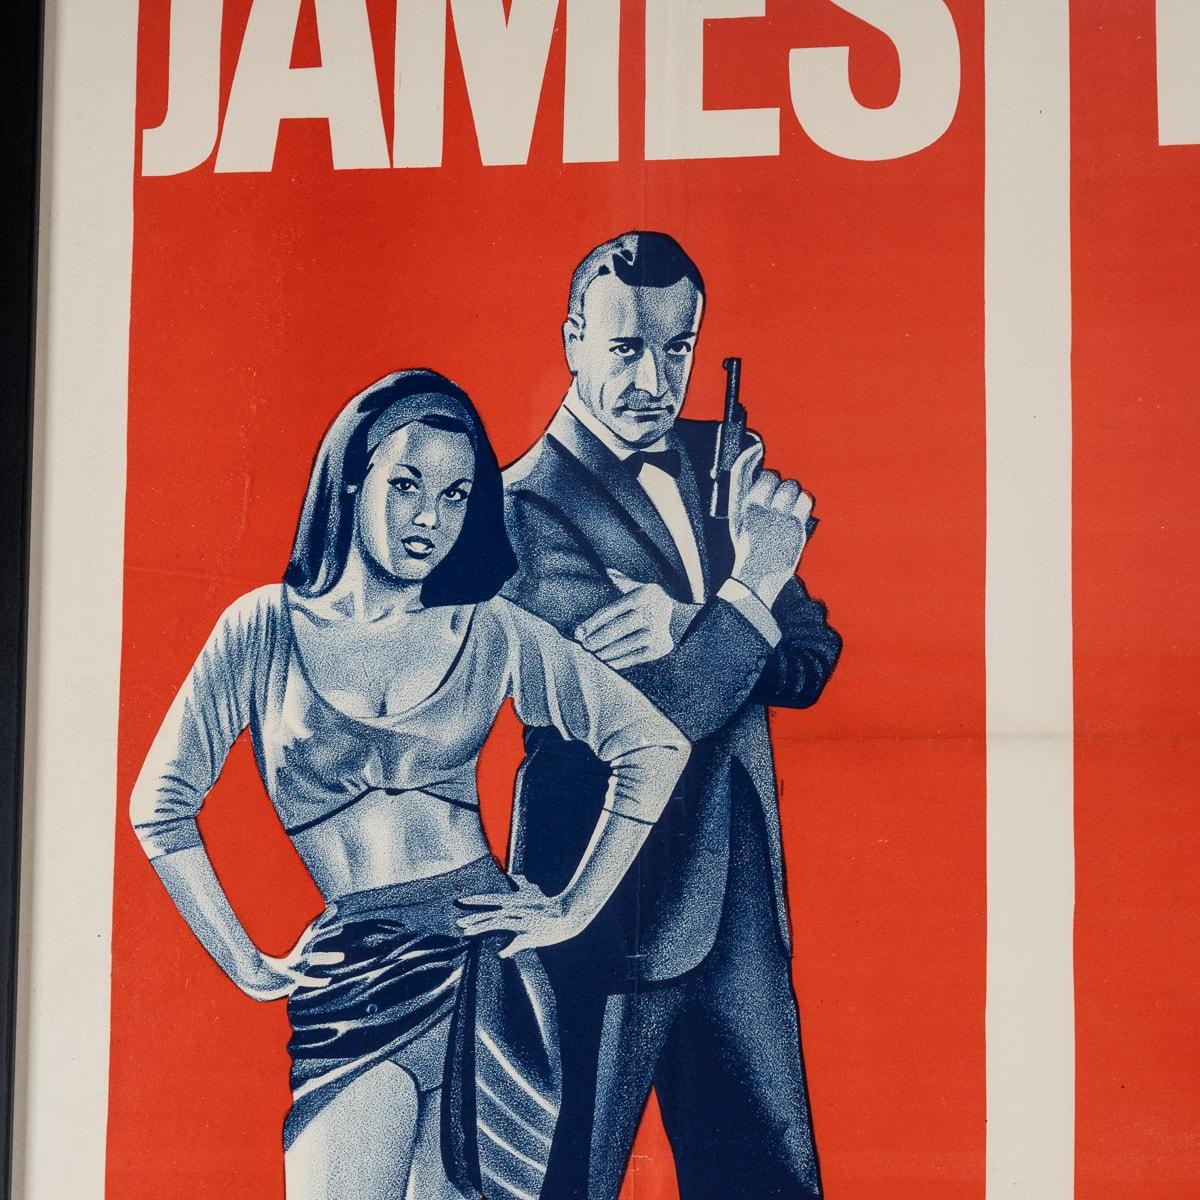 Acrylic Australian Release James Bond 'From Russia With Love' Poster c.1963 For Sale